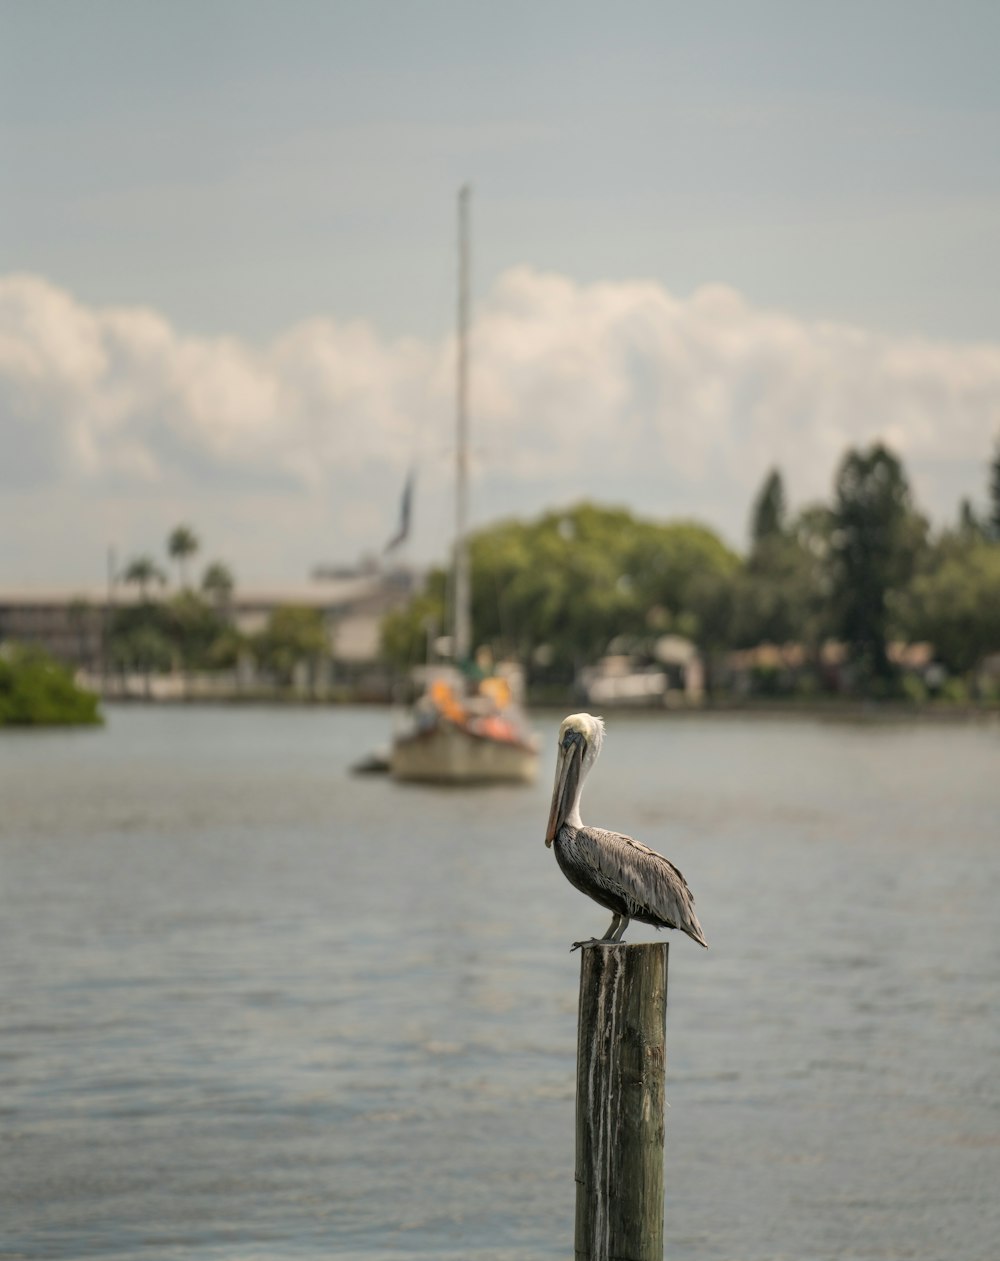 pelican perched on wooden post near body of water during daytime